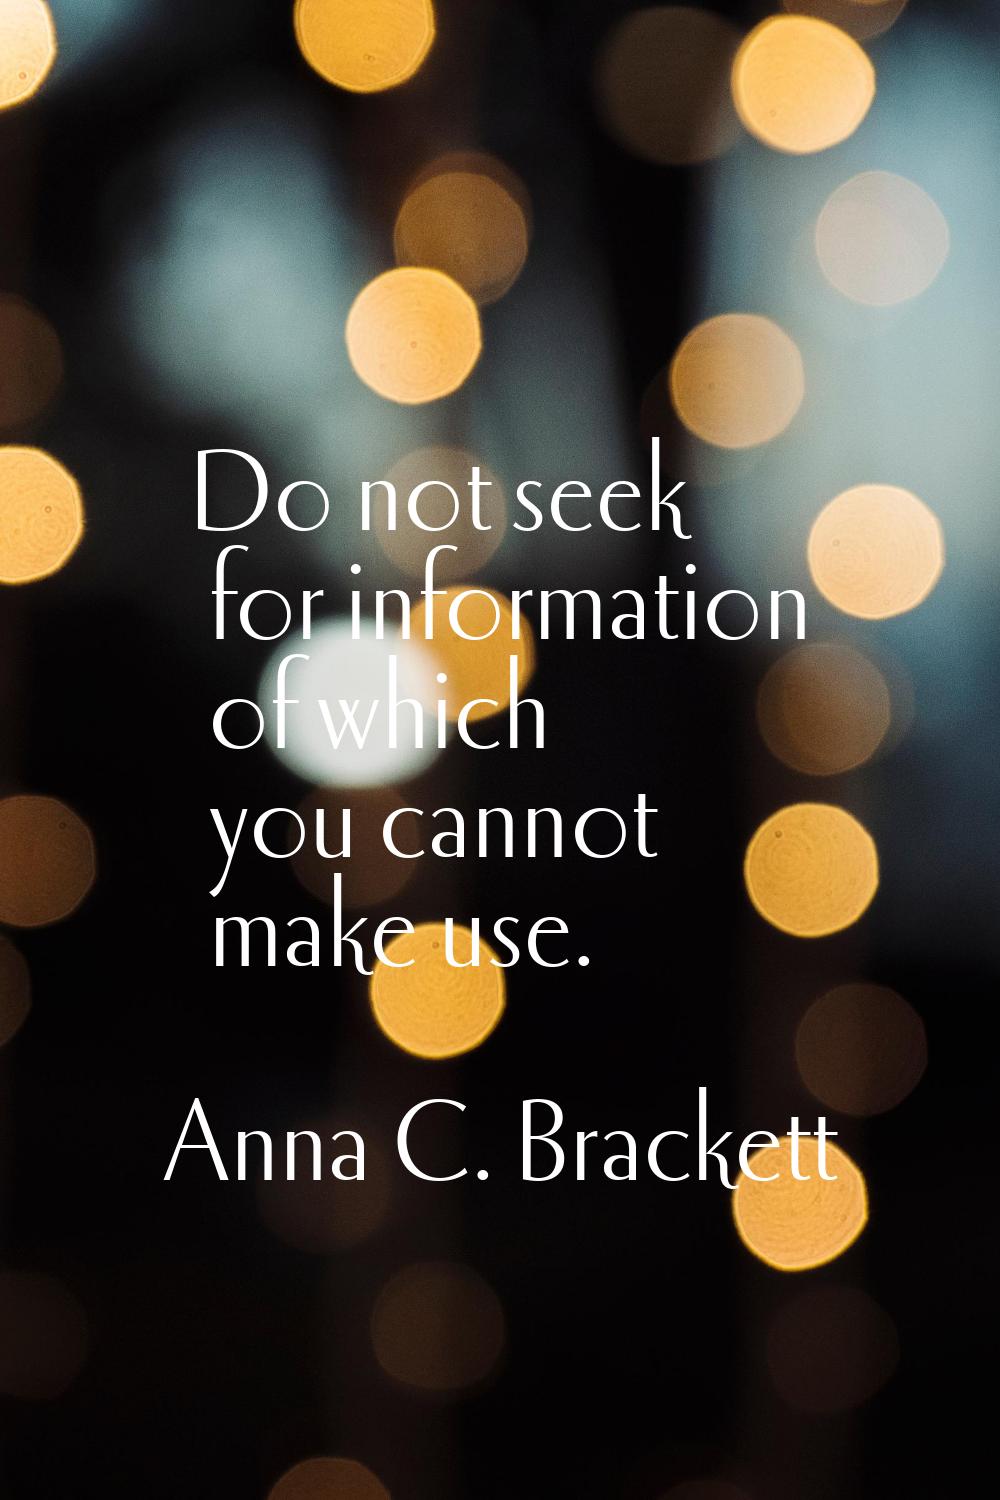 Do not seek for information of which you cannot make use.